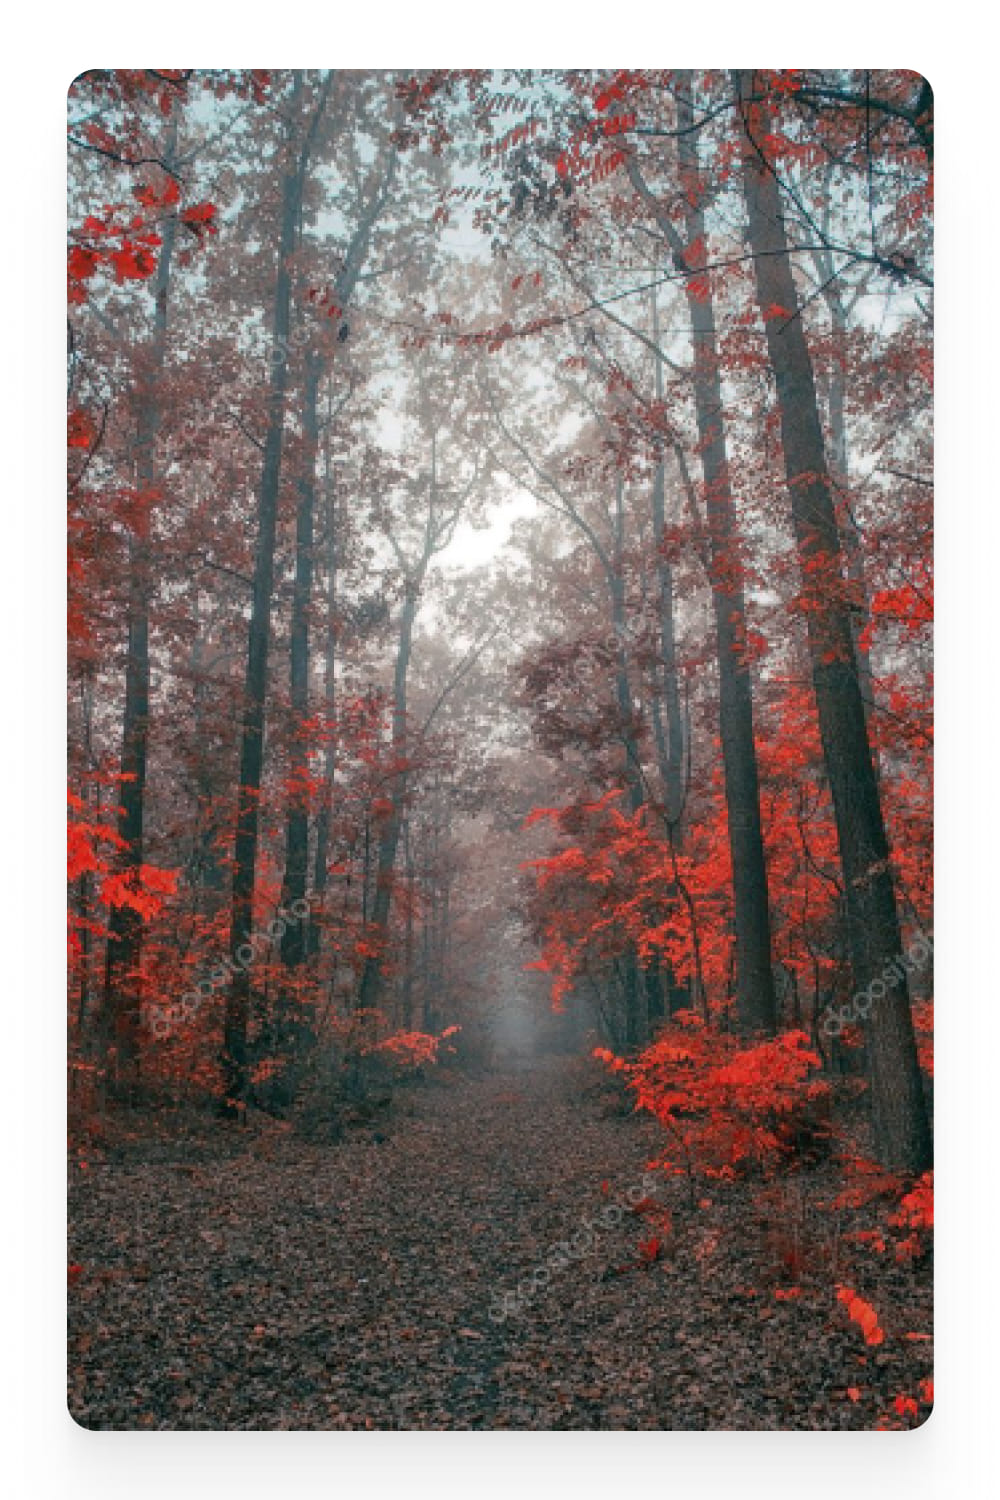 Photo of autumn forest with red leaves.